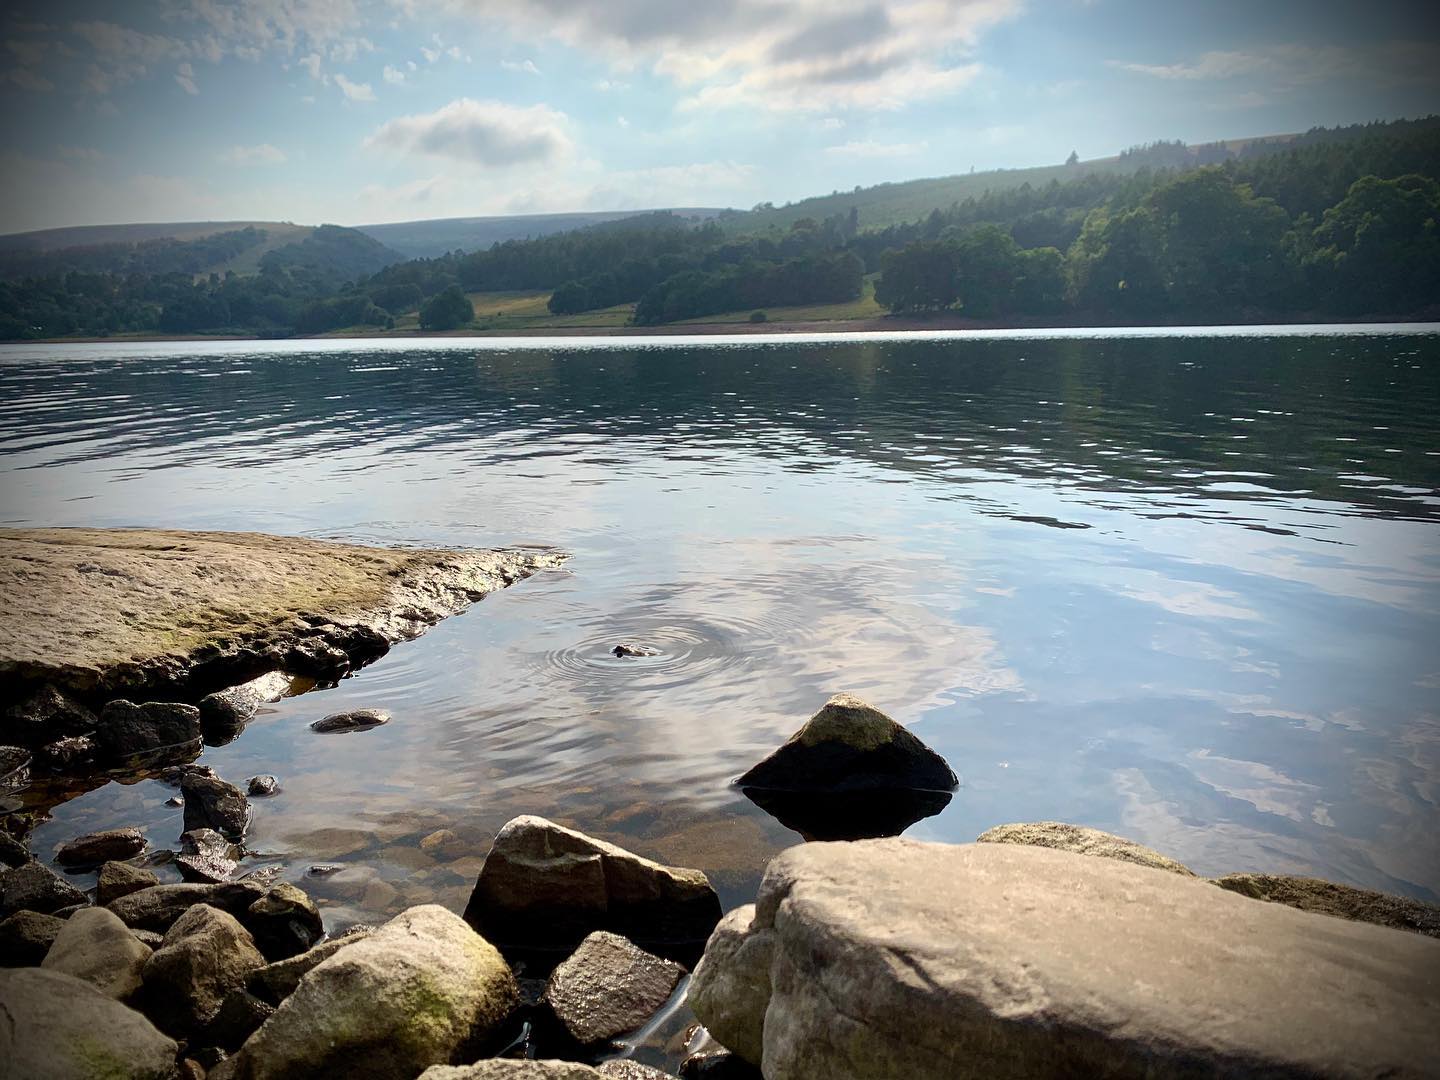 We are open for bookings in a range of water sports down in Buxton, check out the link in our bio for more info and add some adventures to your summer ⛰🥾⛰ 
.
.
.
#wildernessdevelopment #smallbusiness #expeditions #canoeing #kayaking #watersports #outdoorpursuits #outdooradventures #peakdistrict #peakdistrictadventures #outdooractivities #nationalparksuk #booknow